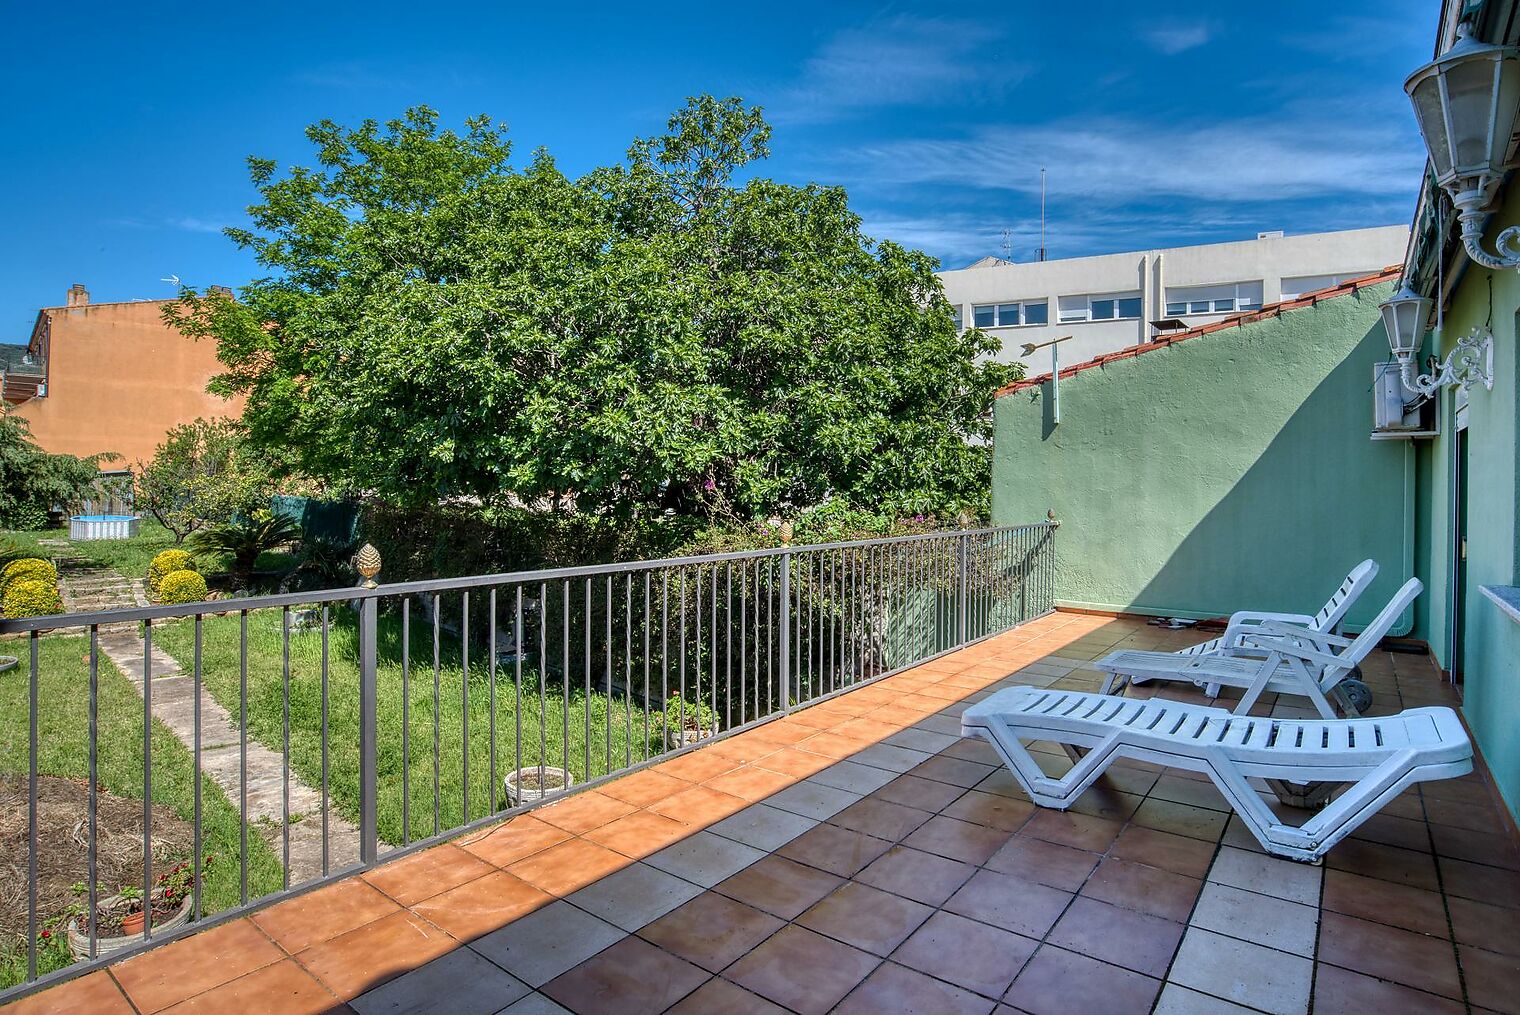 Townhouse in the centre of Calonge, renovated, 4 bedrooms, large garden!